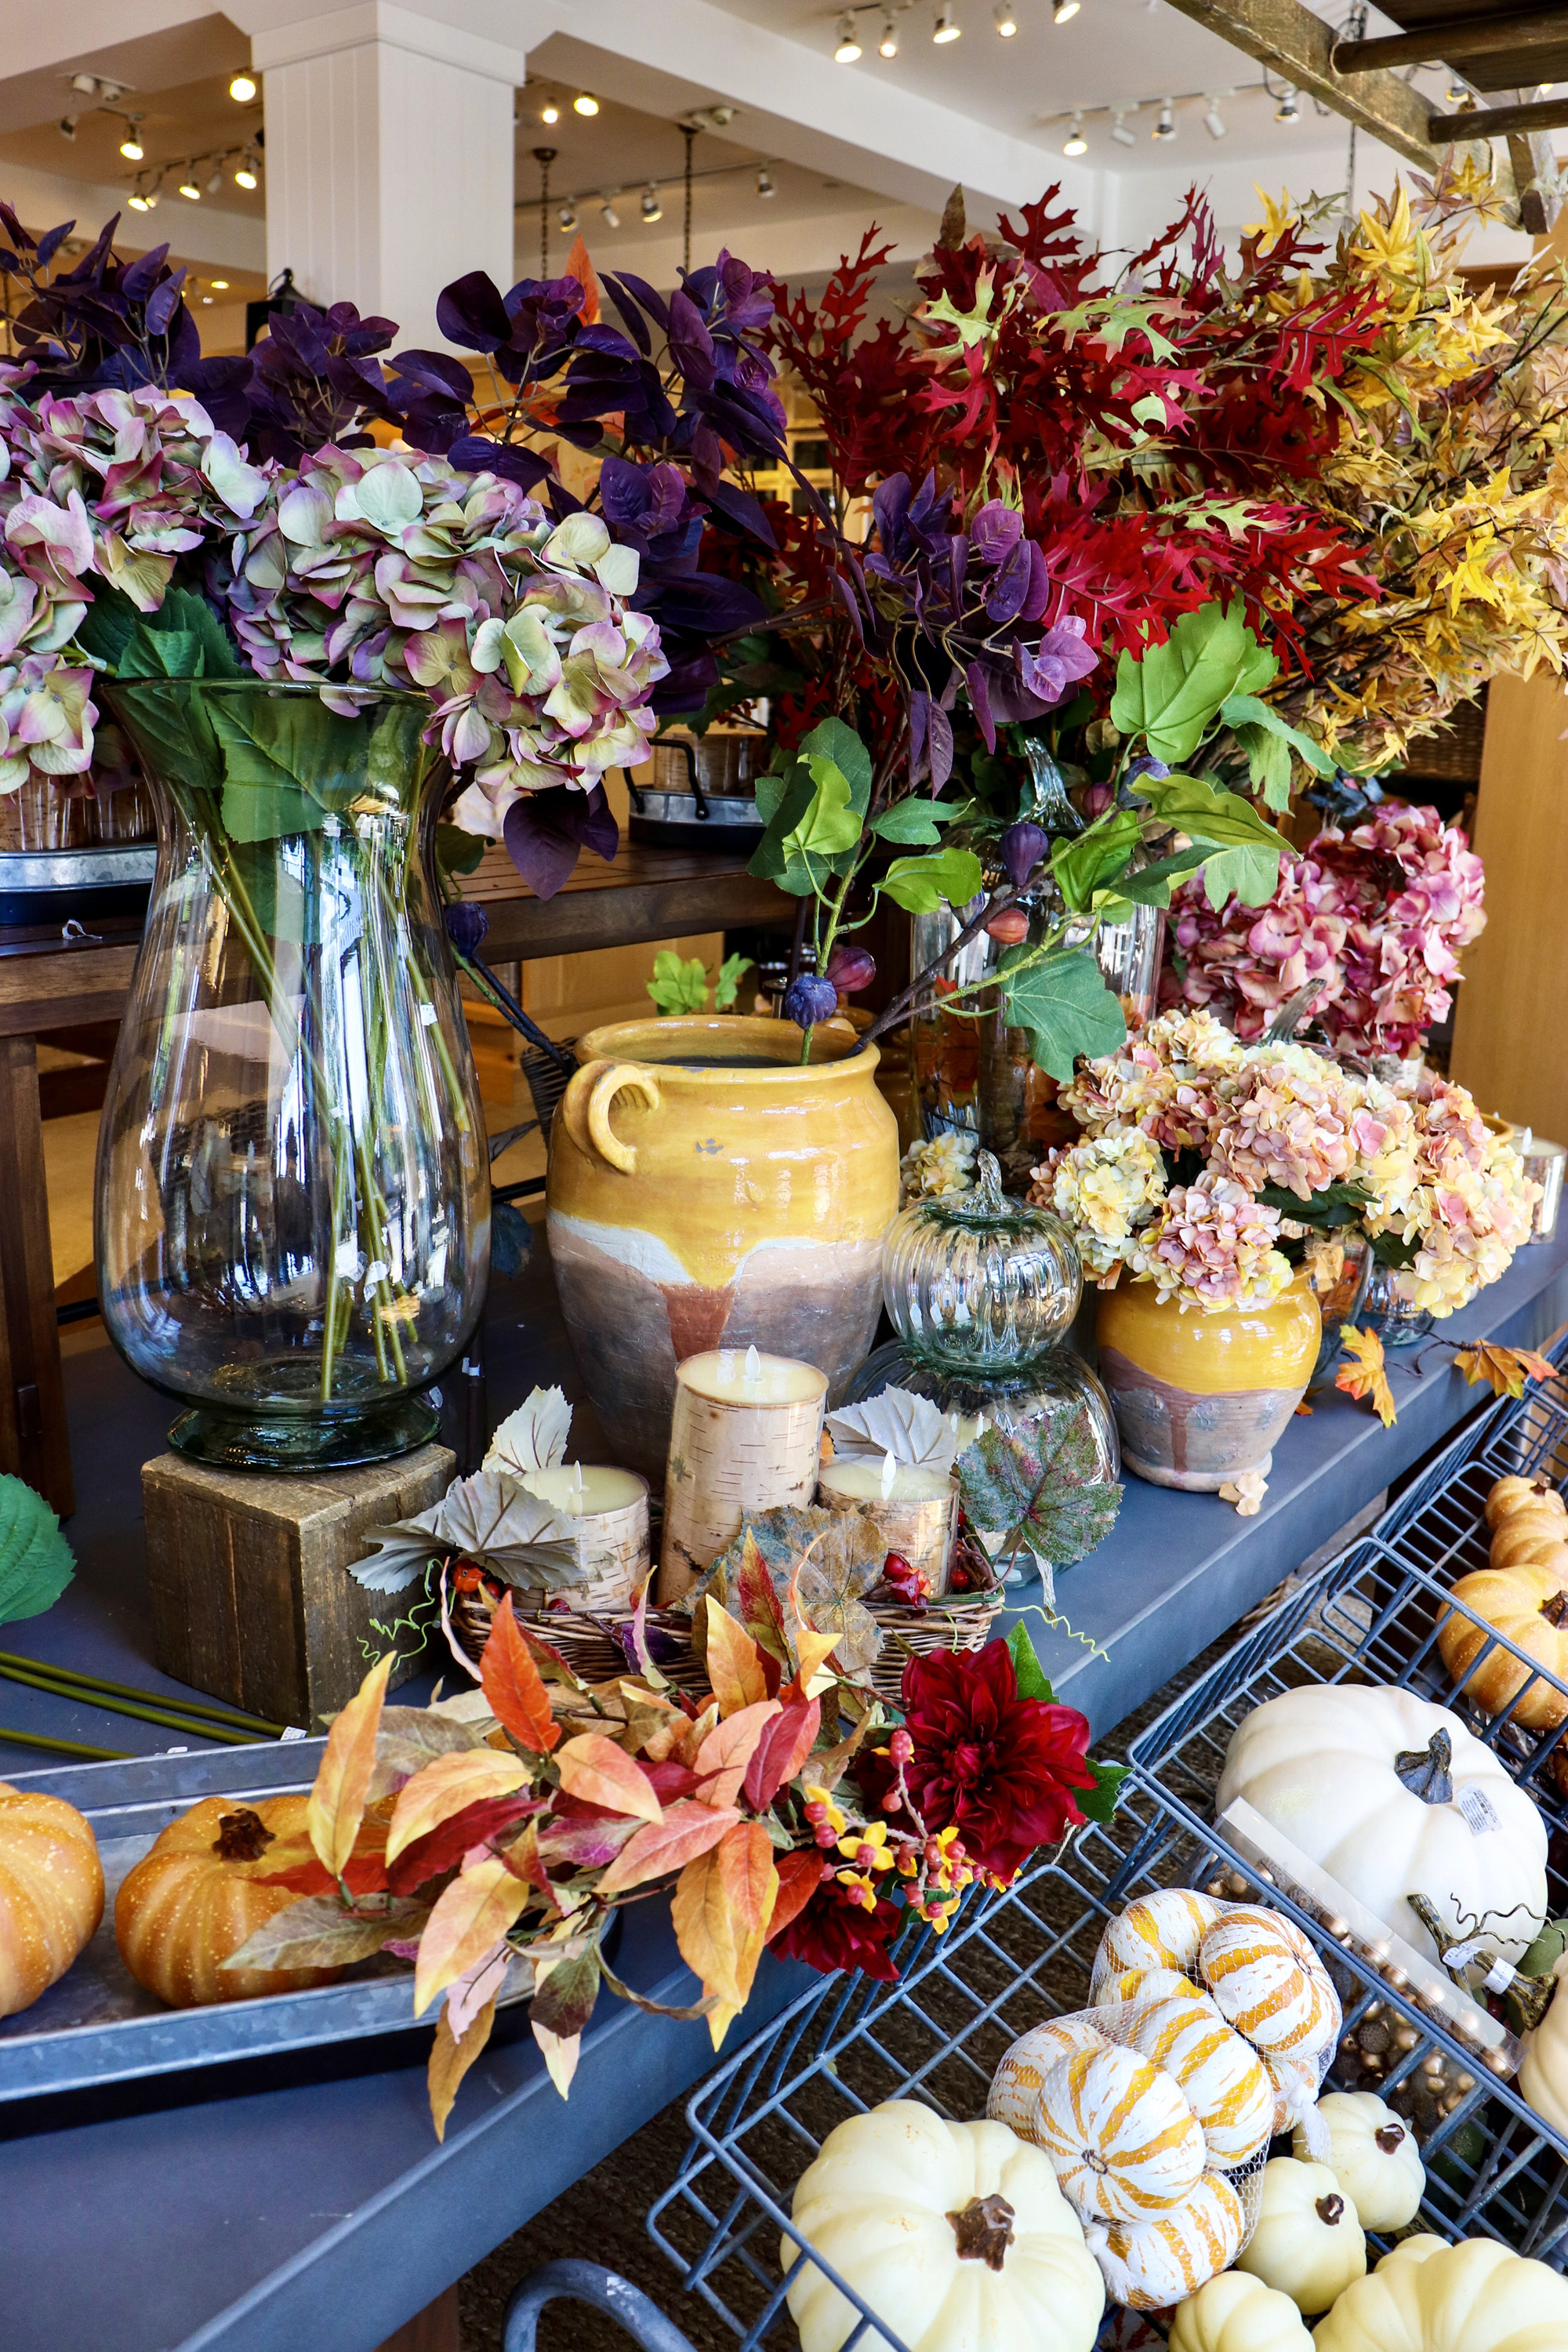 Hunting for Fall and Autumn Decor